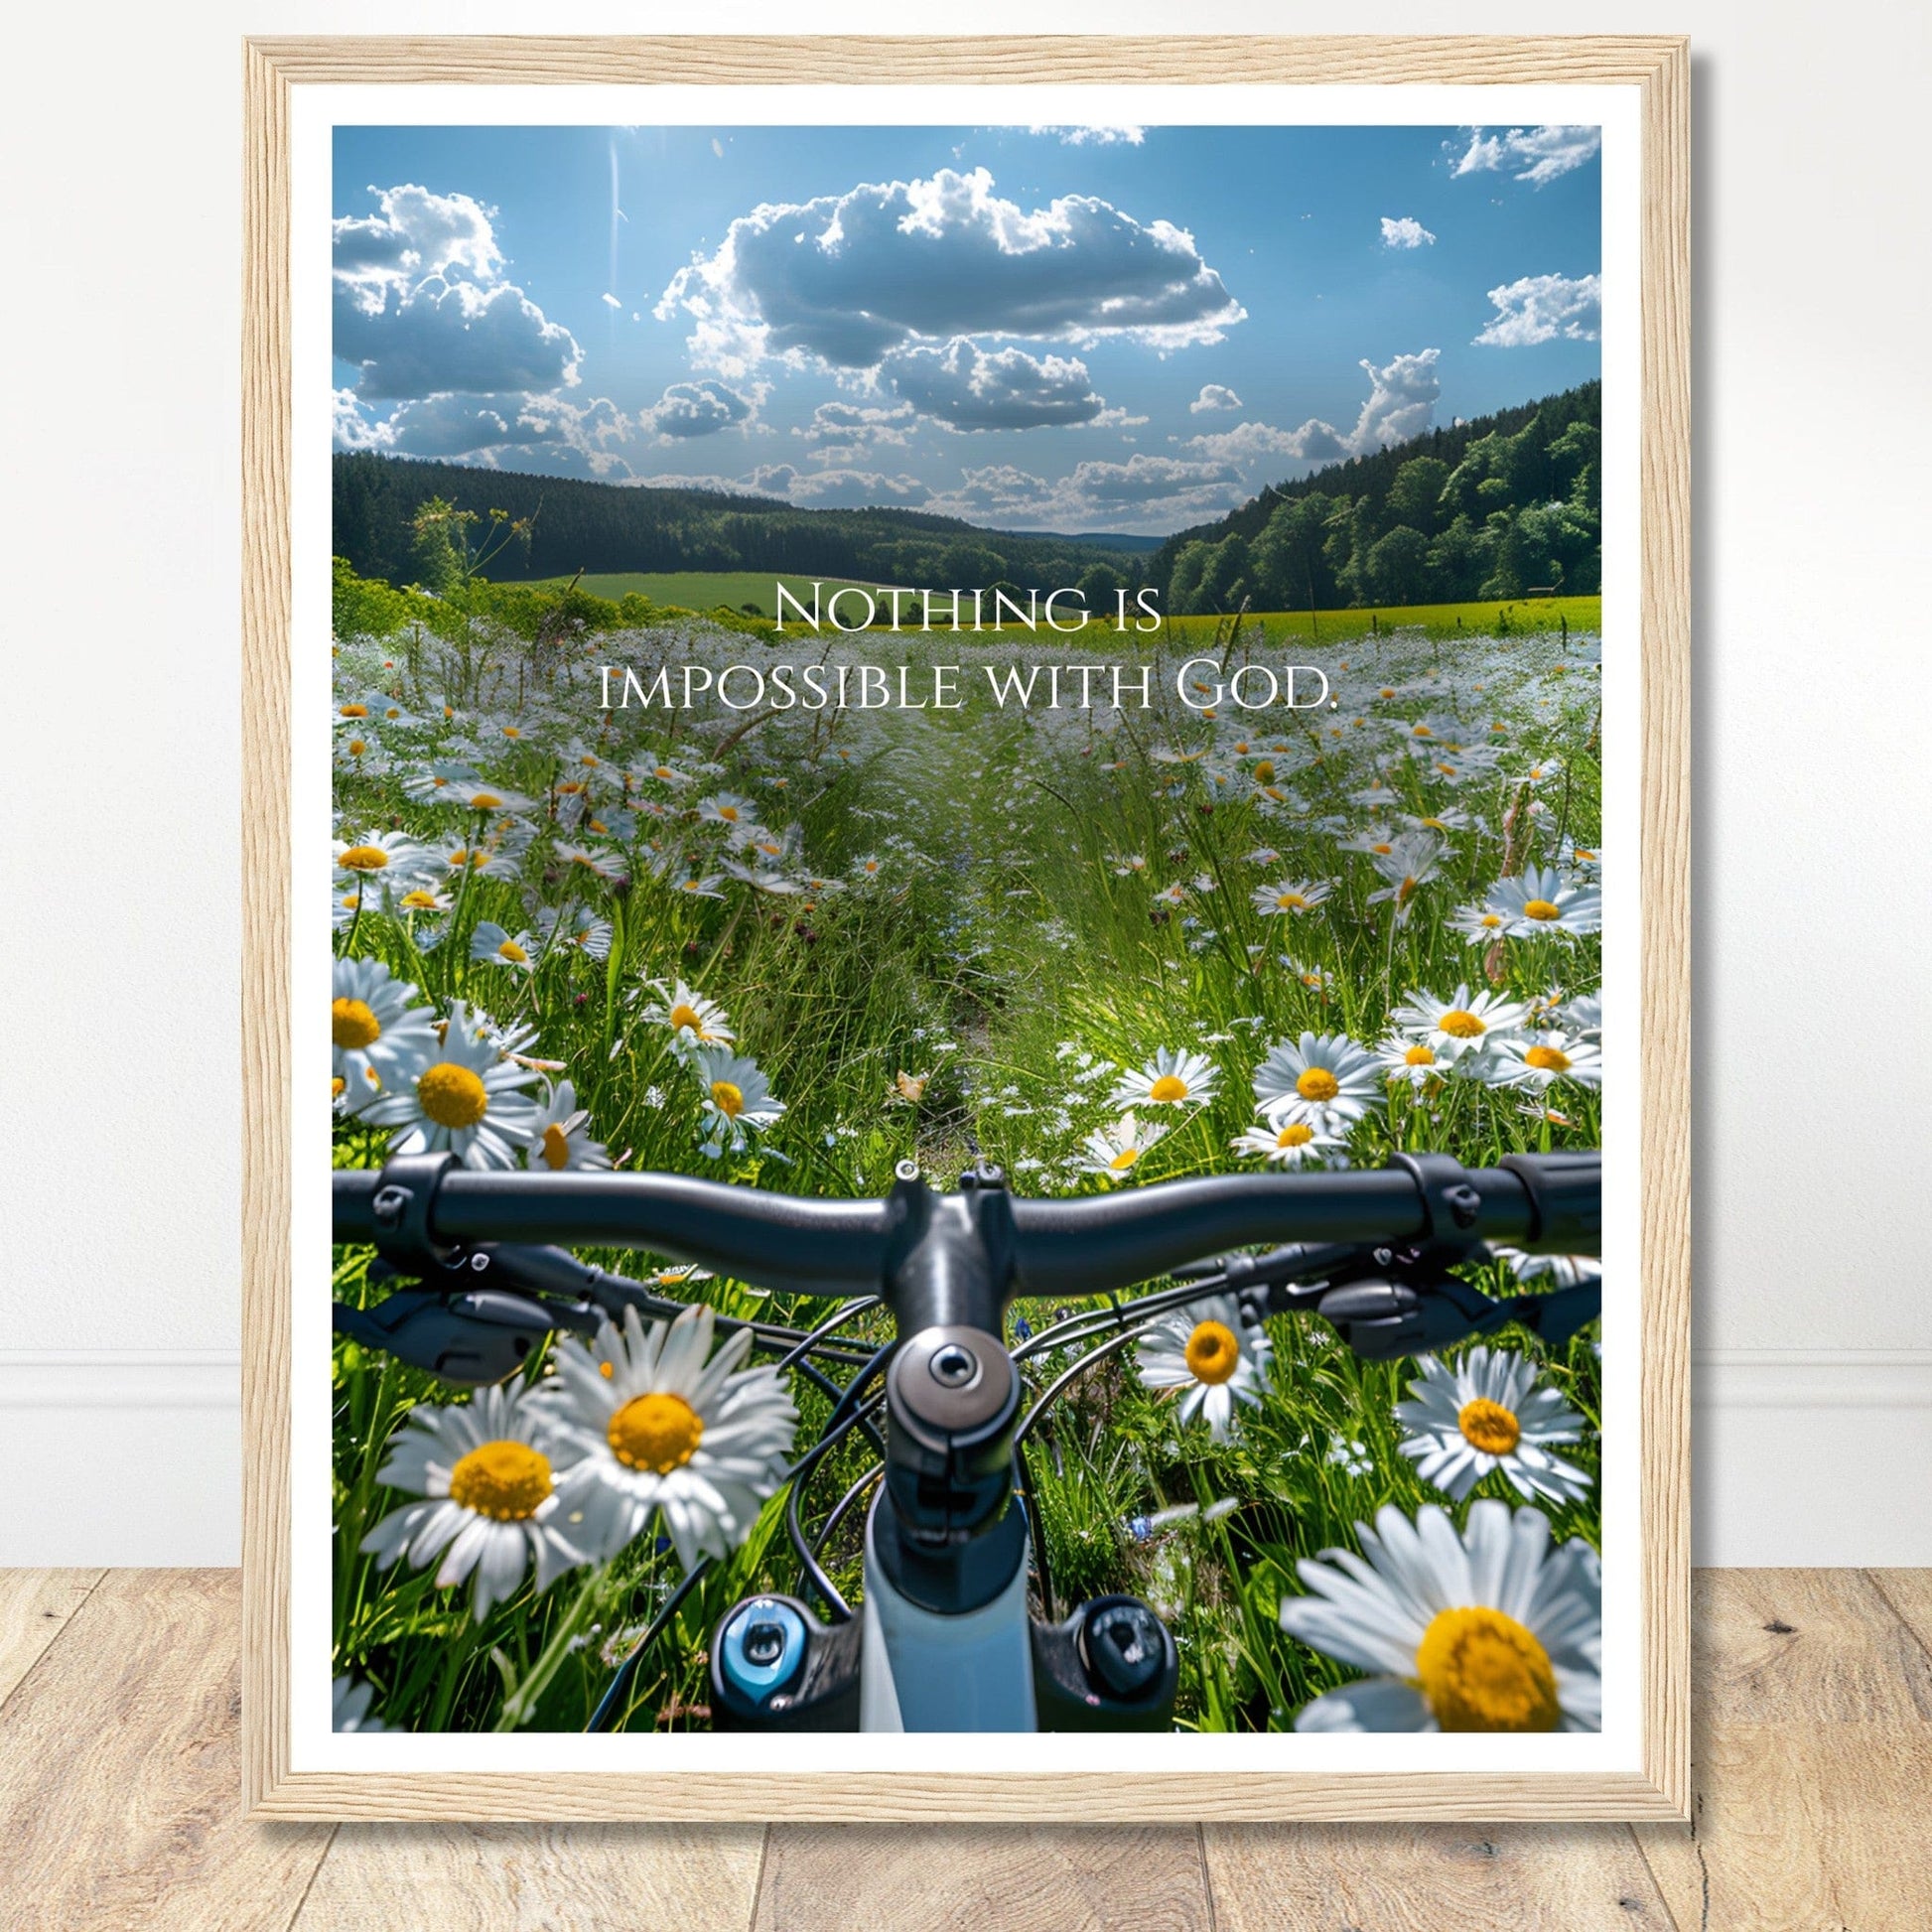 Coffee With My Father Print Material 40x50 cm / 16x20″ / Premium Matte Paper Wooden Framed Poster / Wood frame Nothing is Impossible With God - Artwork